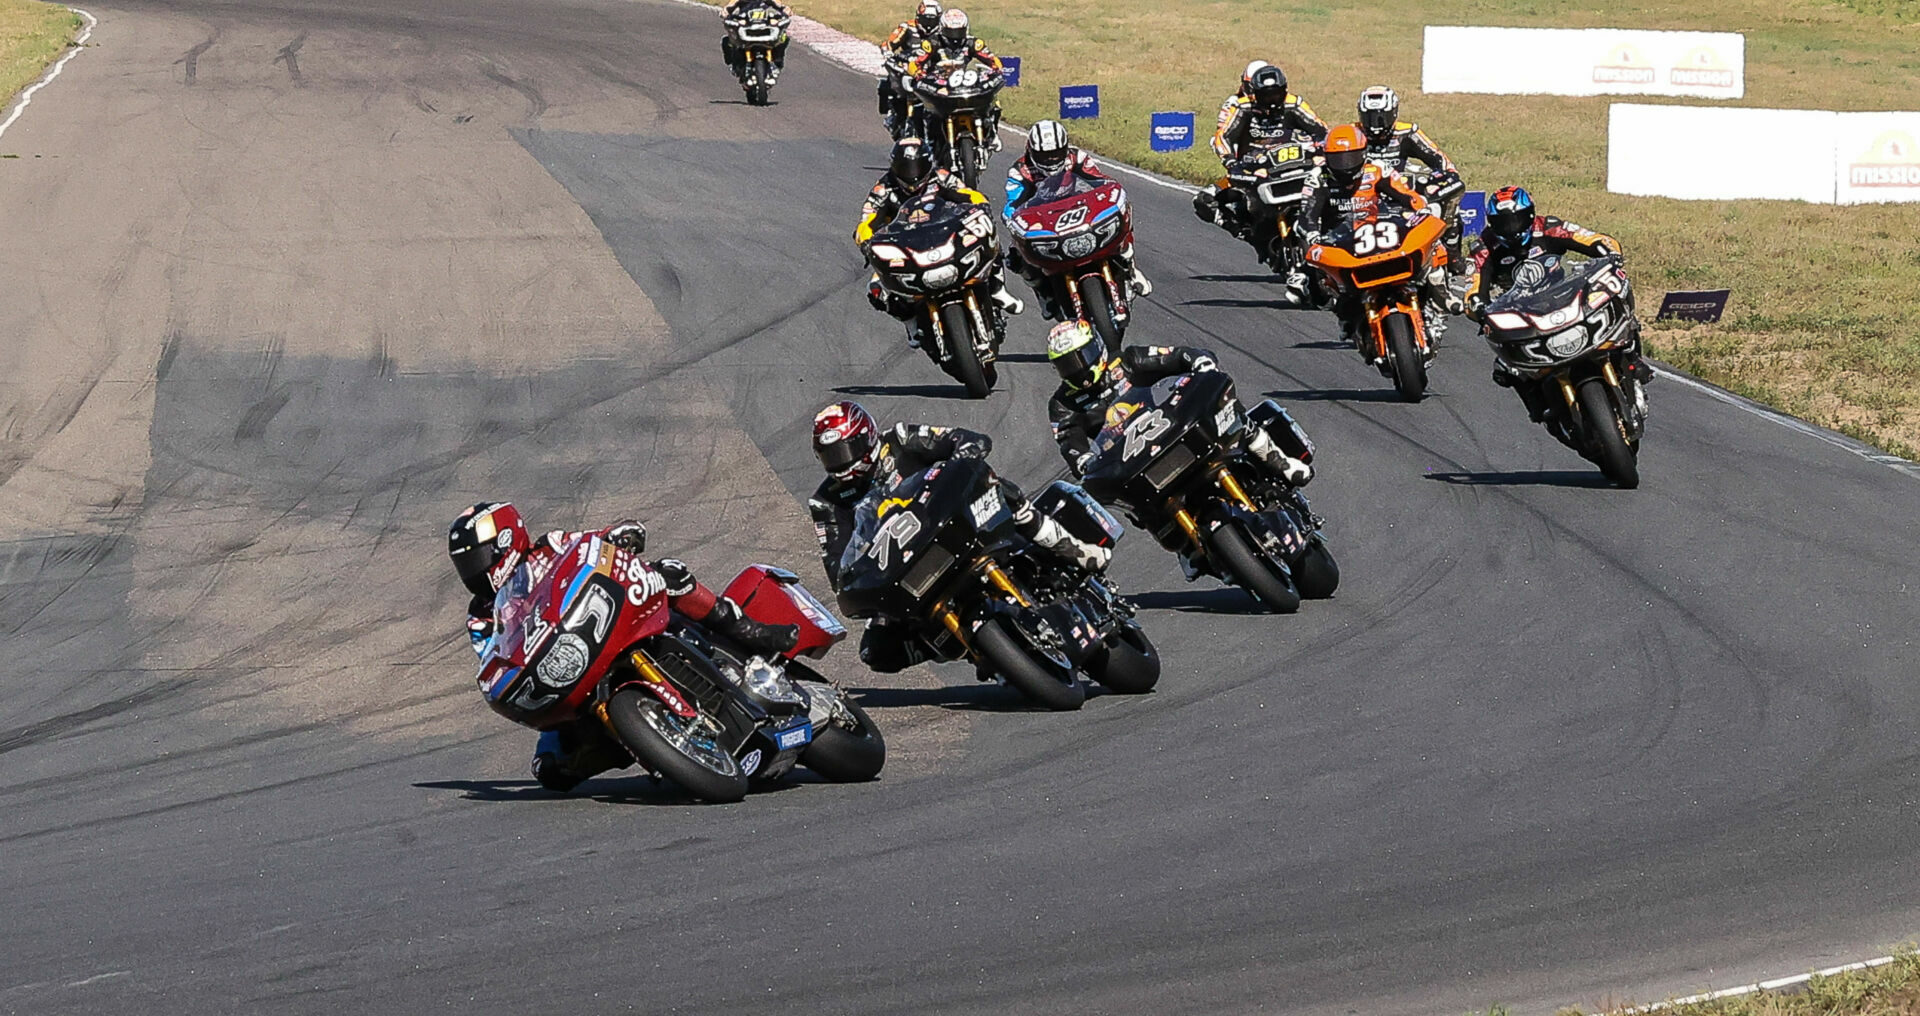 The battle for the Mission King Of The Baggers Championship is going down to the wire as three riders - Hayden Gillim (79), James Rispoli (43) and Kyle Wyman (33) - are within three points of each other in the battle for the title as the series heads to Circuit of The Americas, September 8-10, Photo by Brian J. Nelson